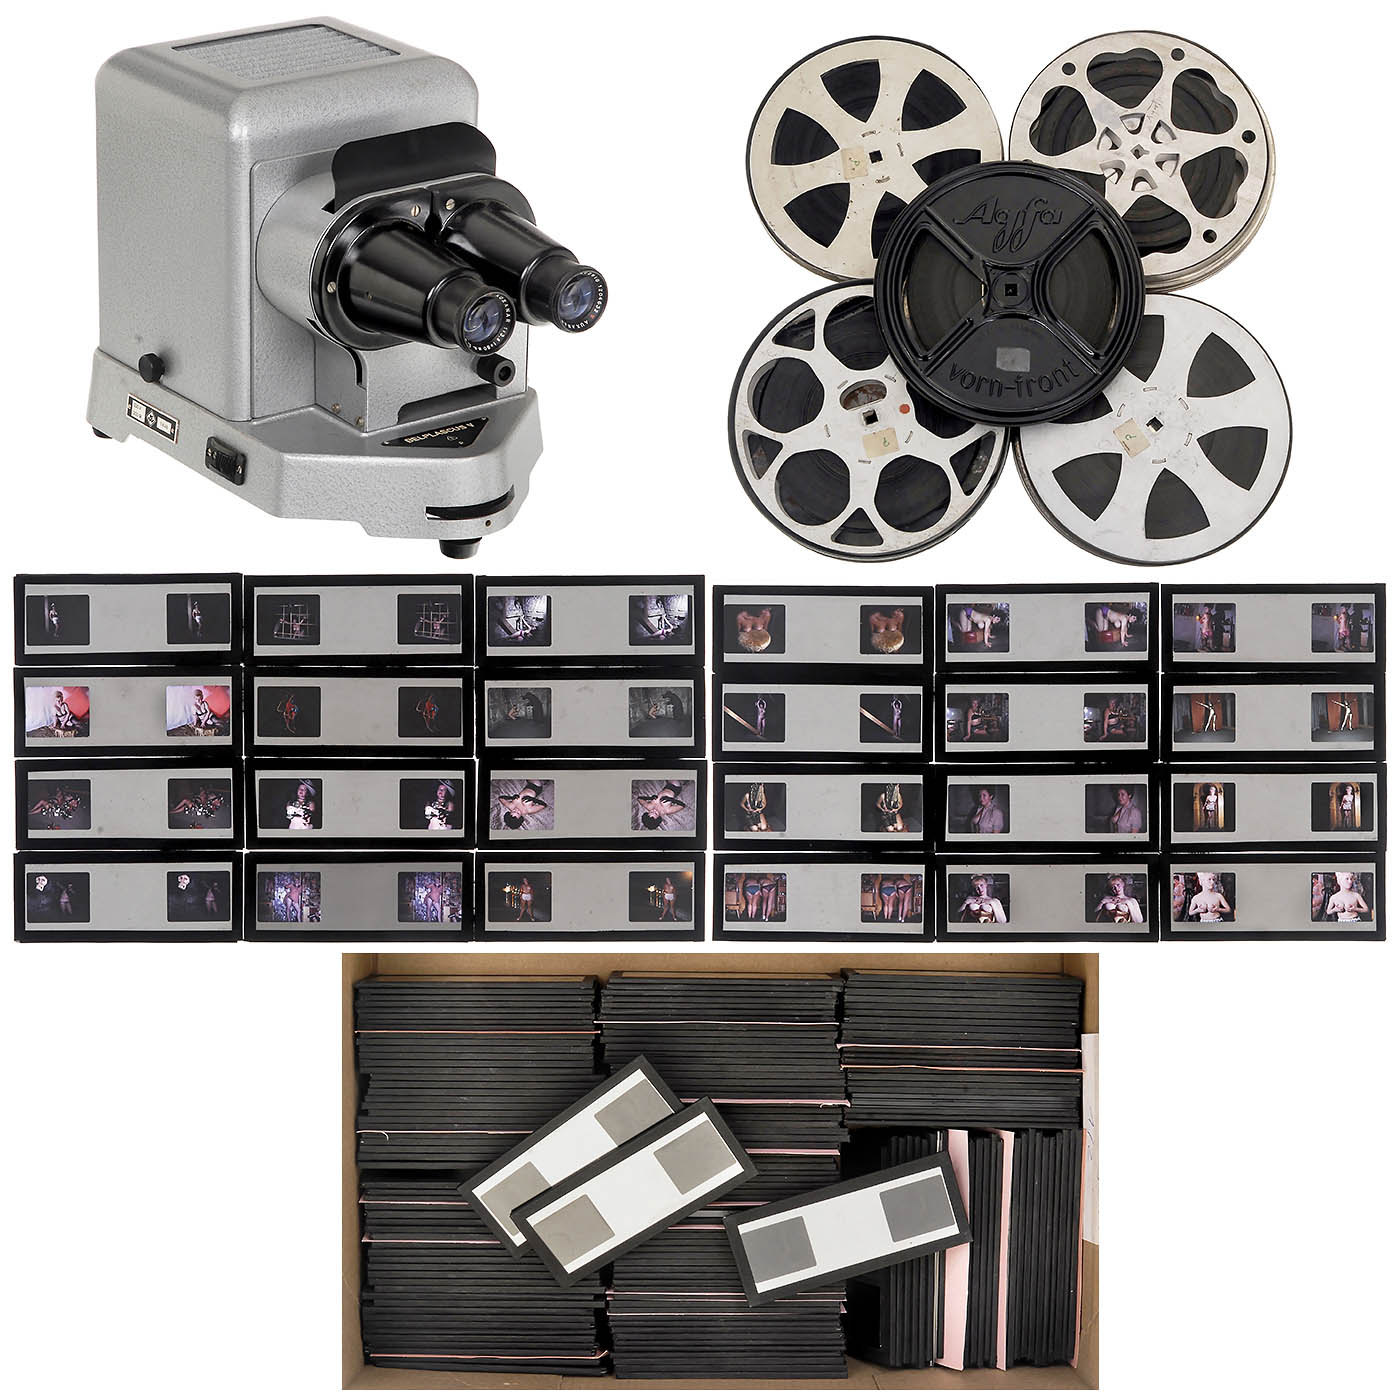 Erotic Stereo Slides and 16mm Films